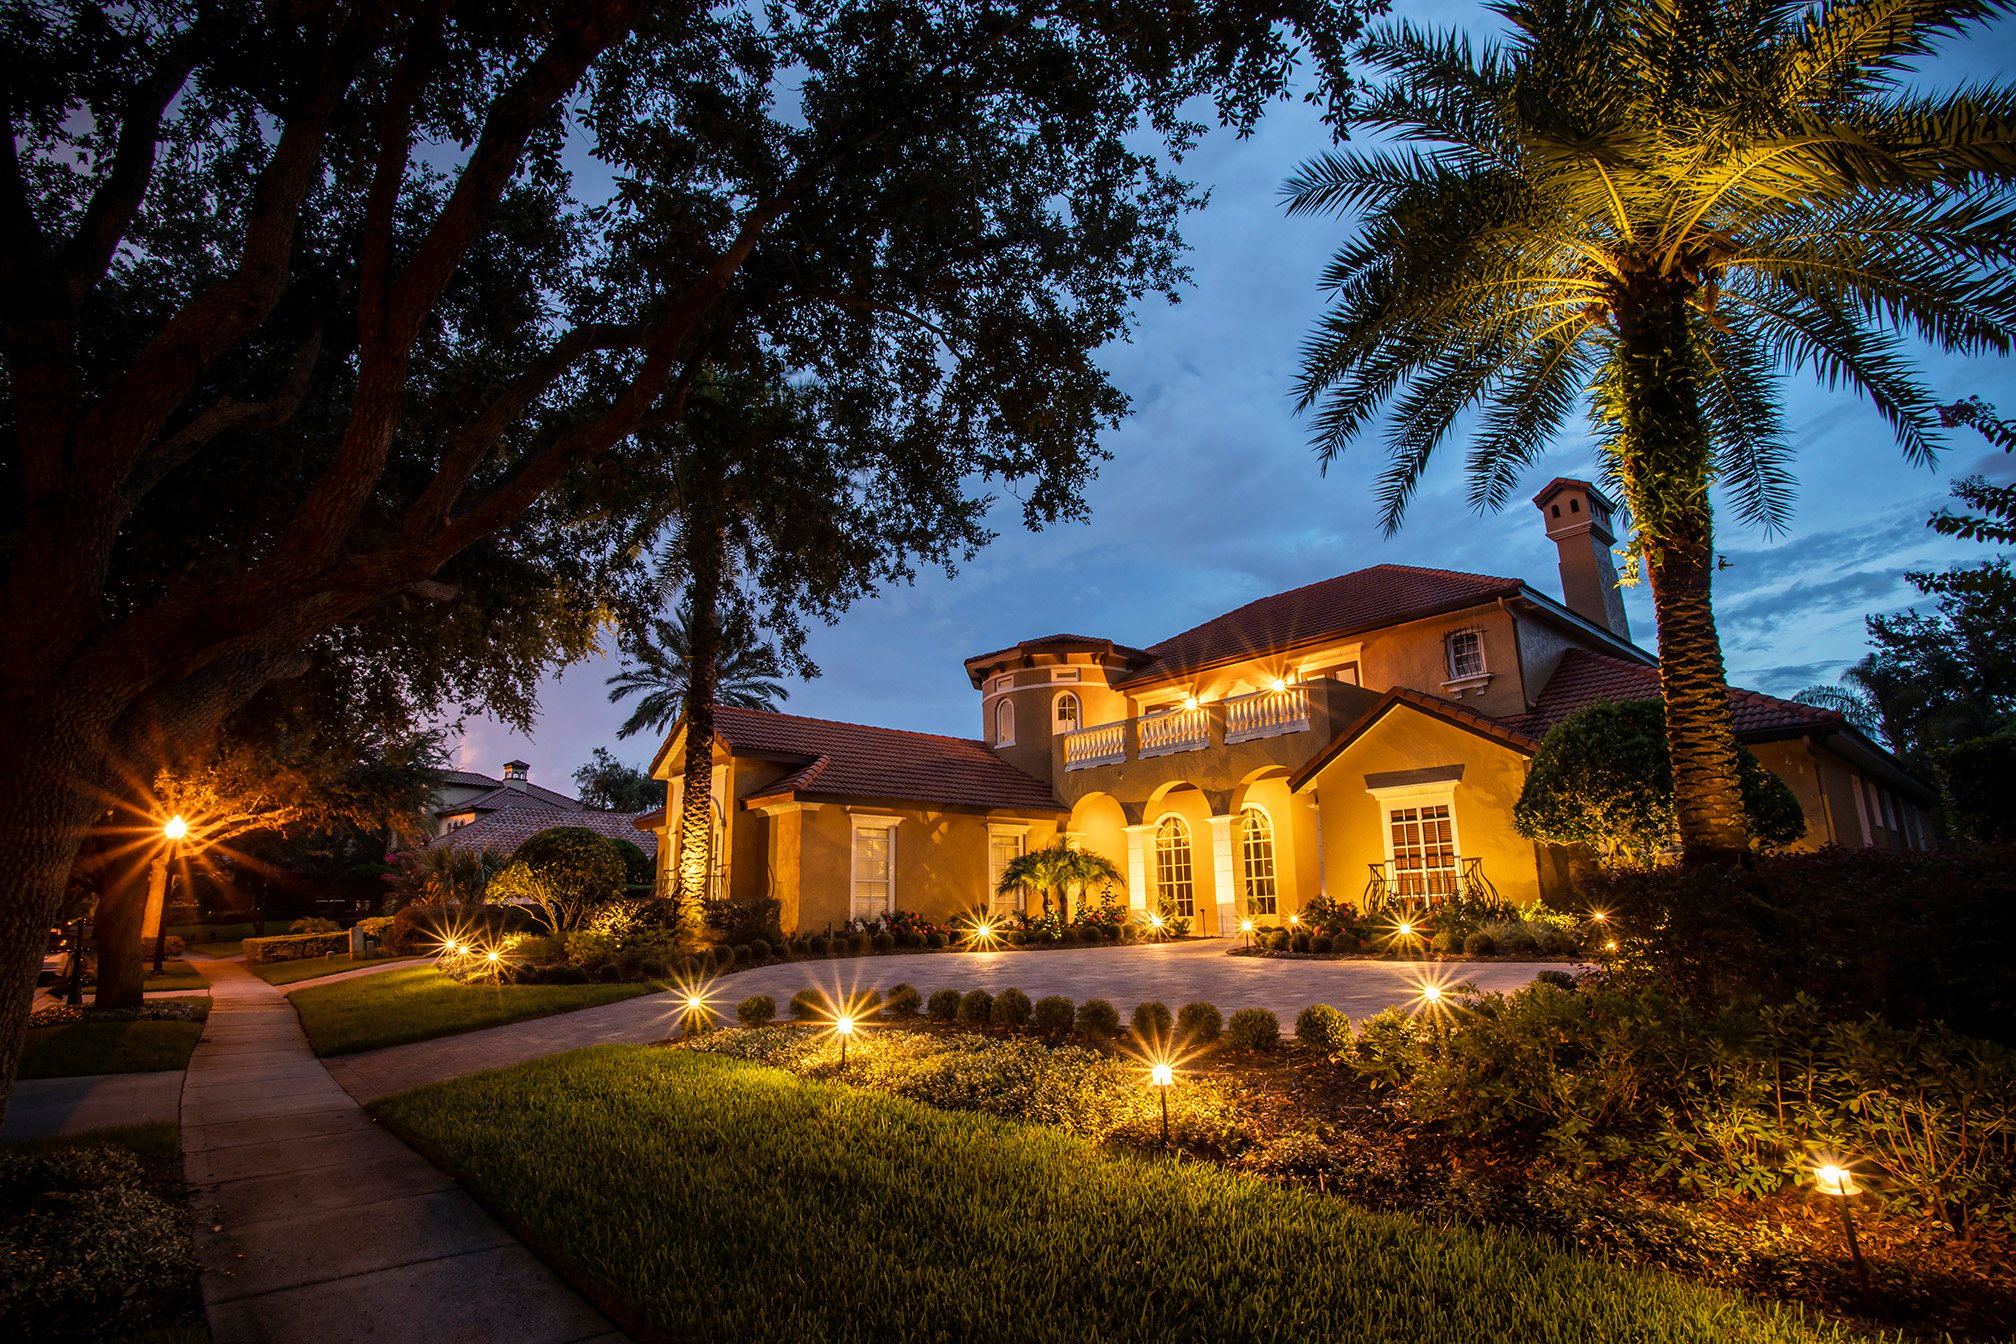 home with landscape lighting and neat landscape beds